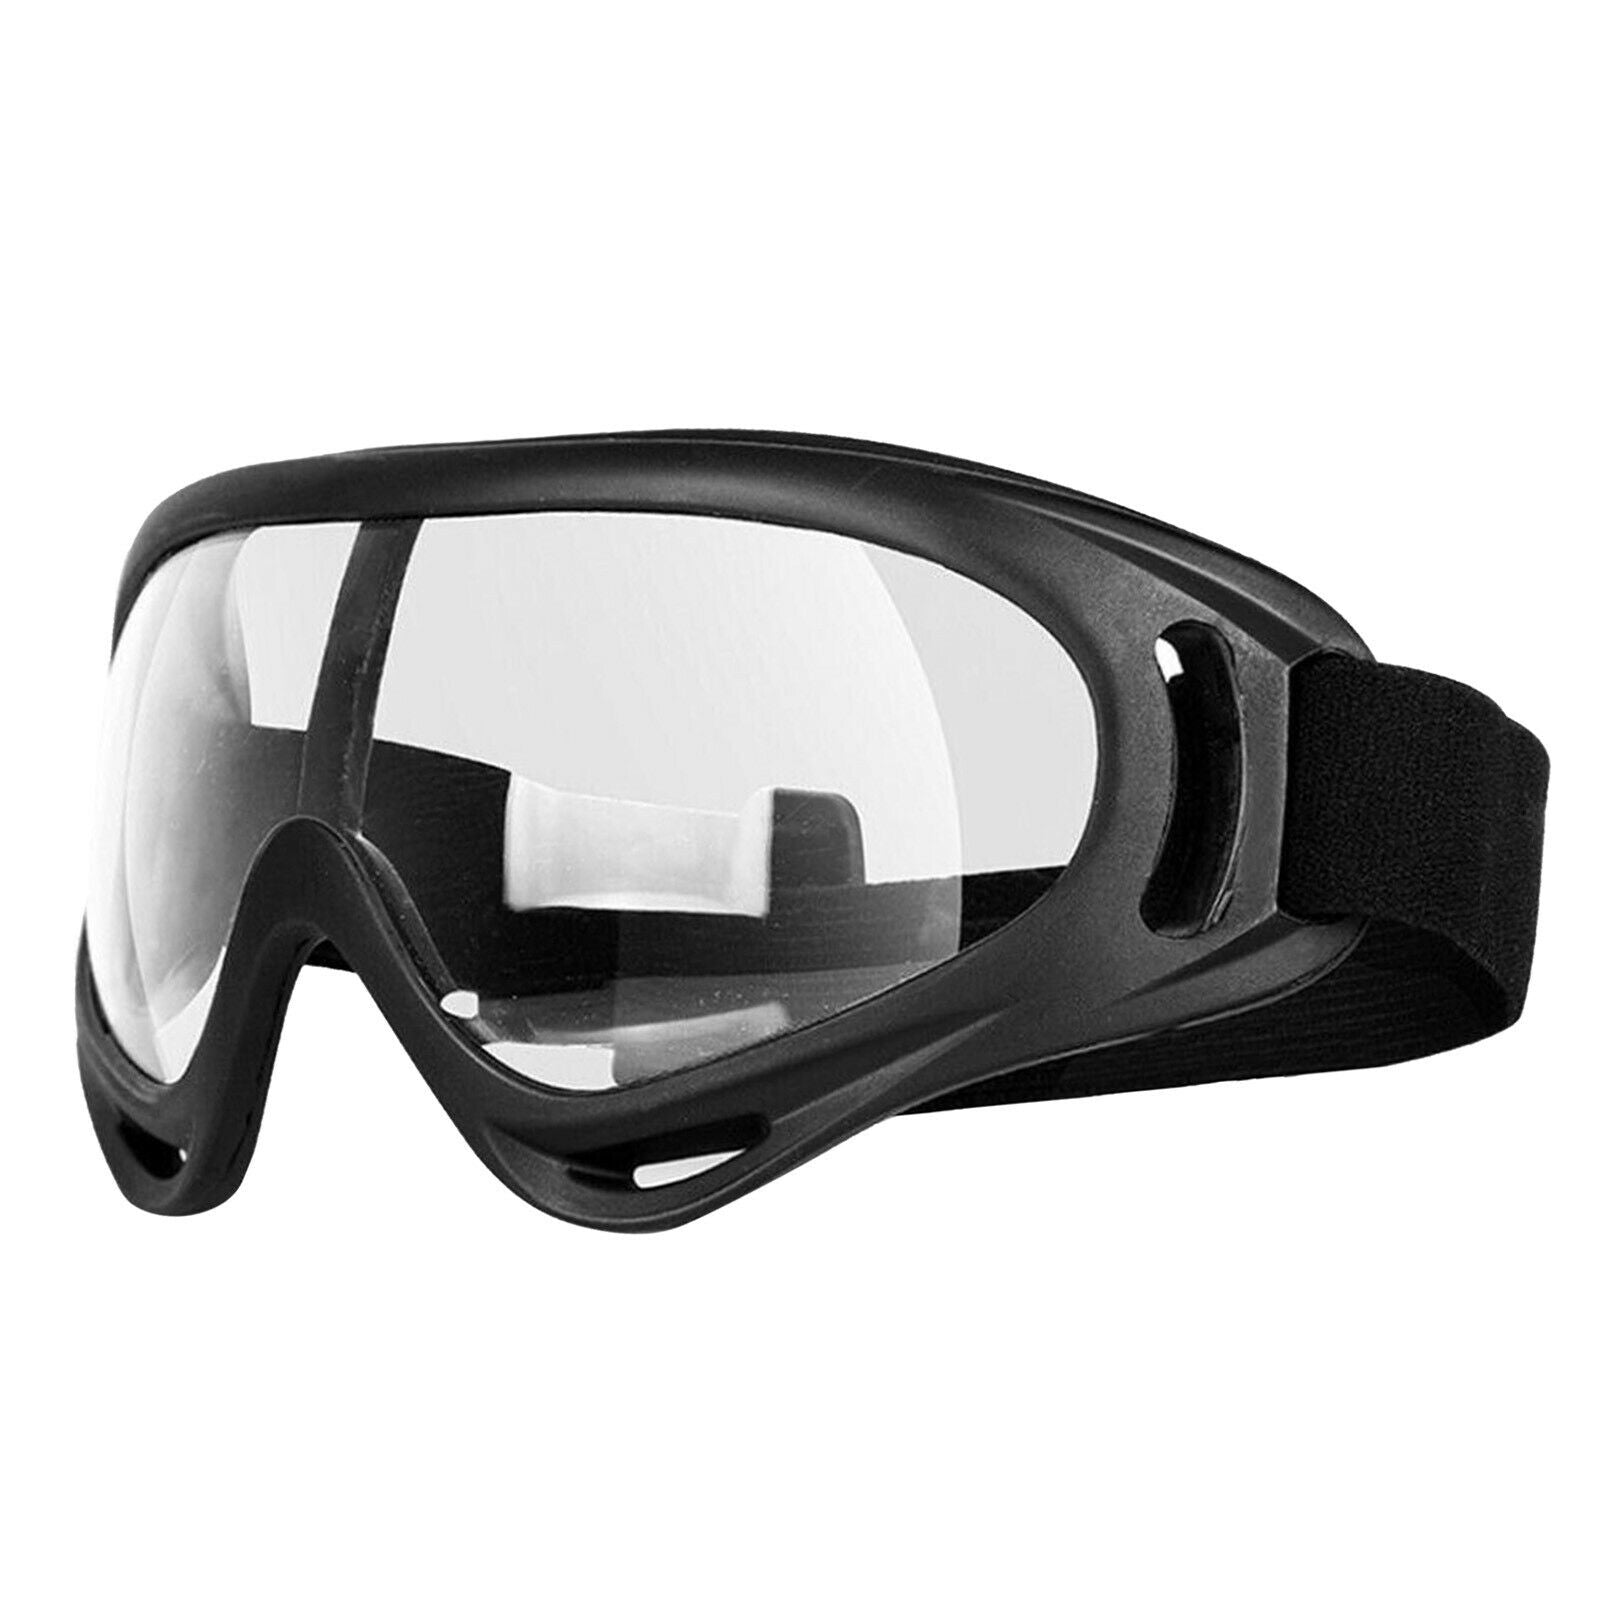 Motorcycle Chemical Splash Safety Goggles Anti Fog Protective for Lab Work